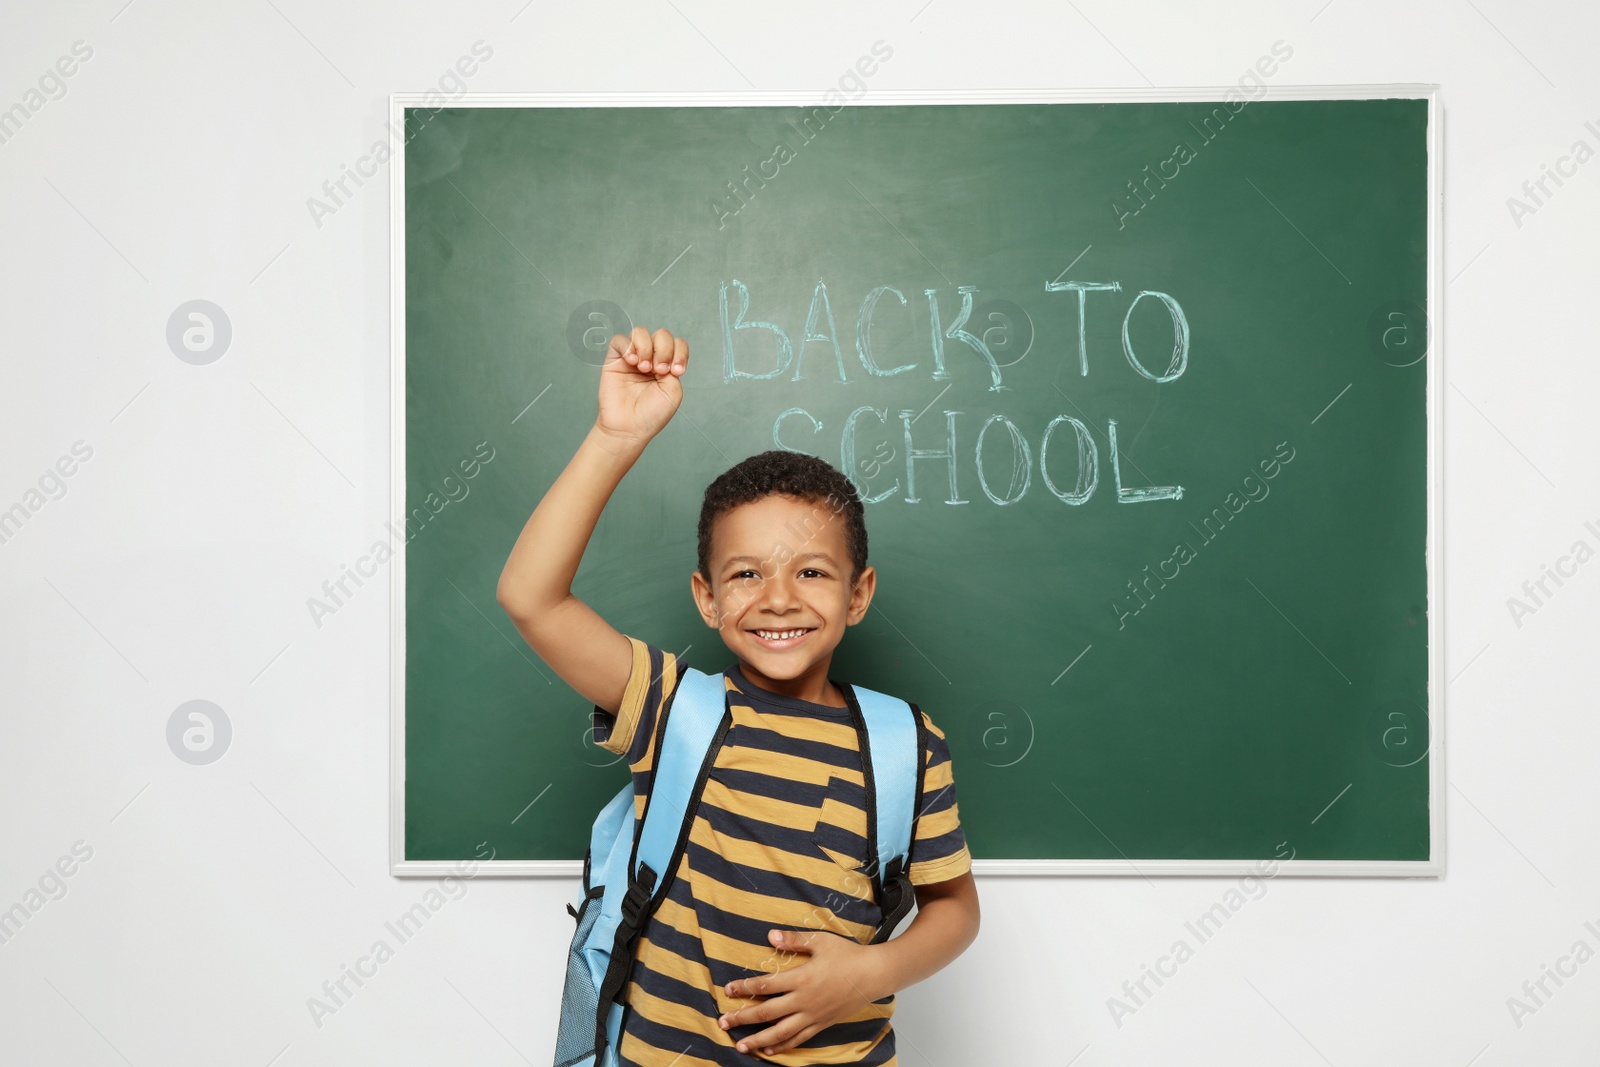 Photo of Little African-American child near chalkboard with text BACK TO SCHOOL